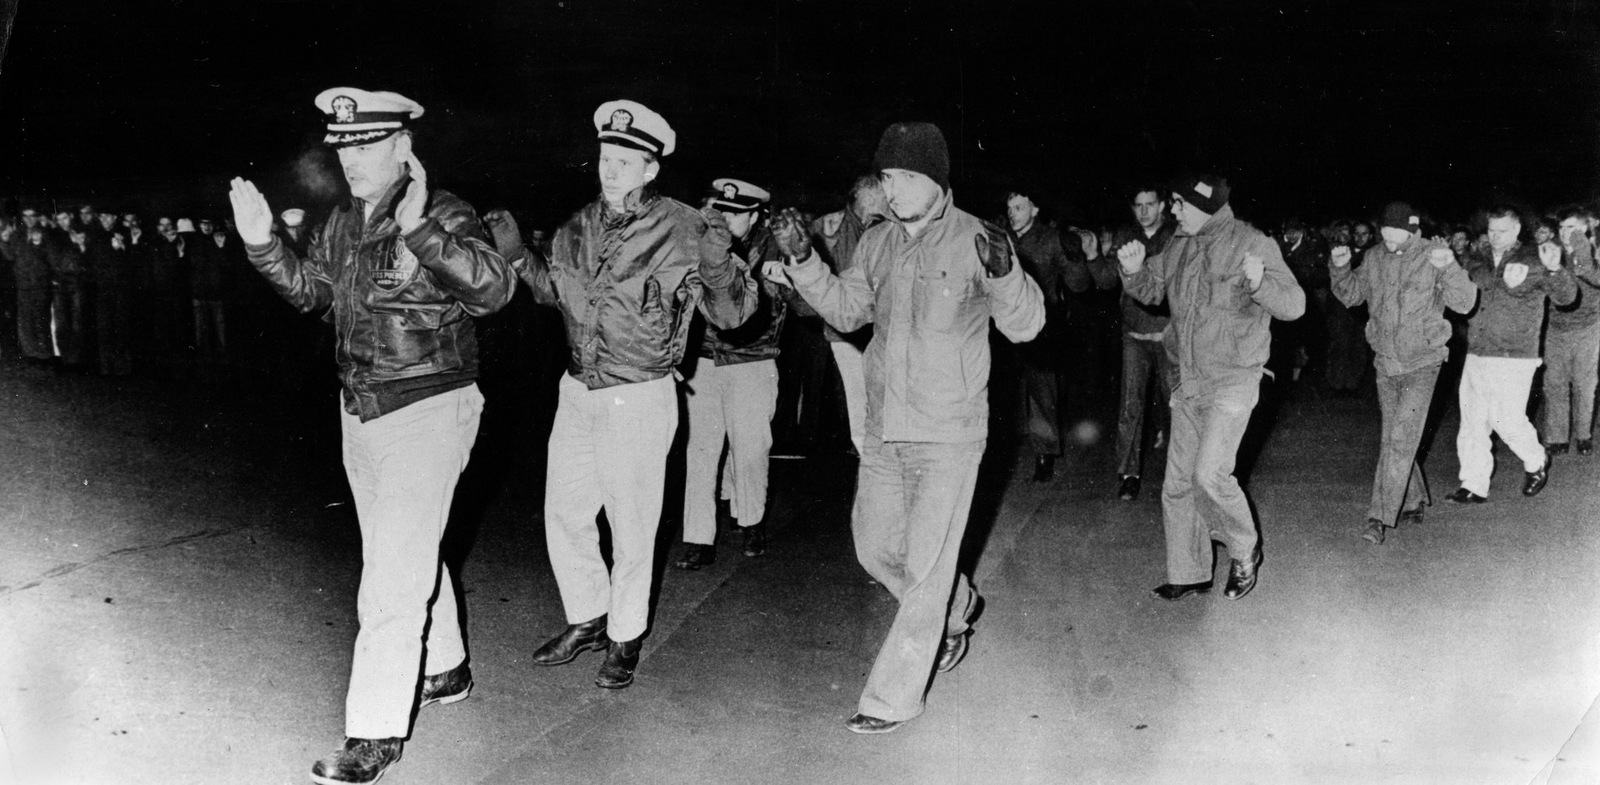 Crew members of the USS Pueblo are led into captivity after the vessel was seized by North Korean patrol boats in the Sea of Japan on Jan. 23, 1968. | AP